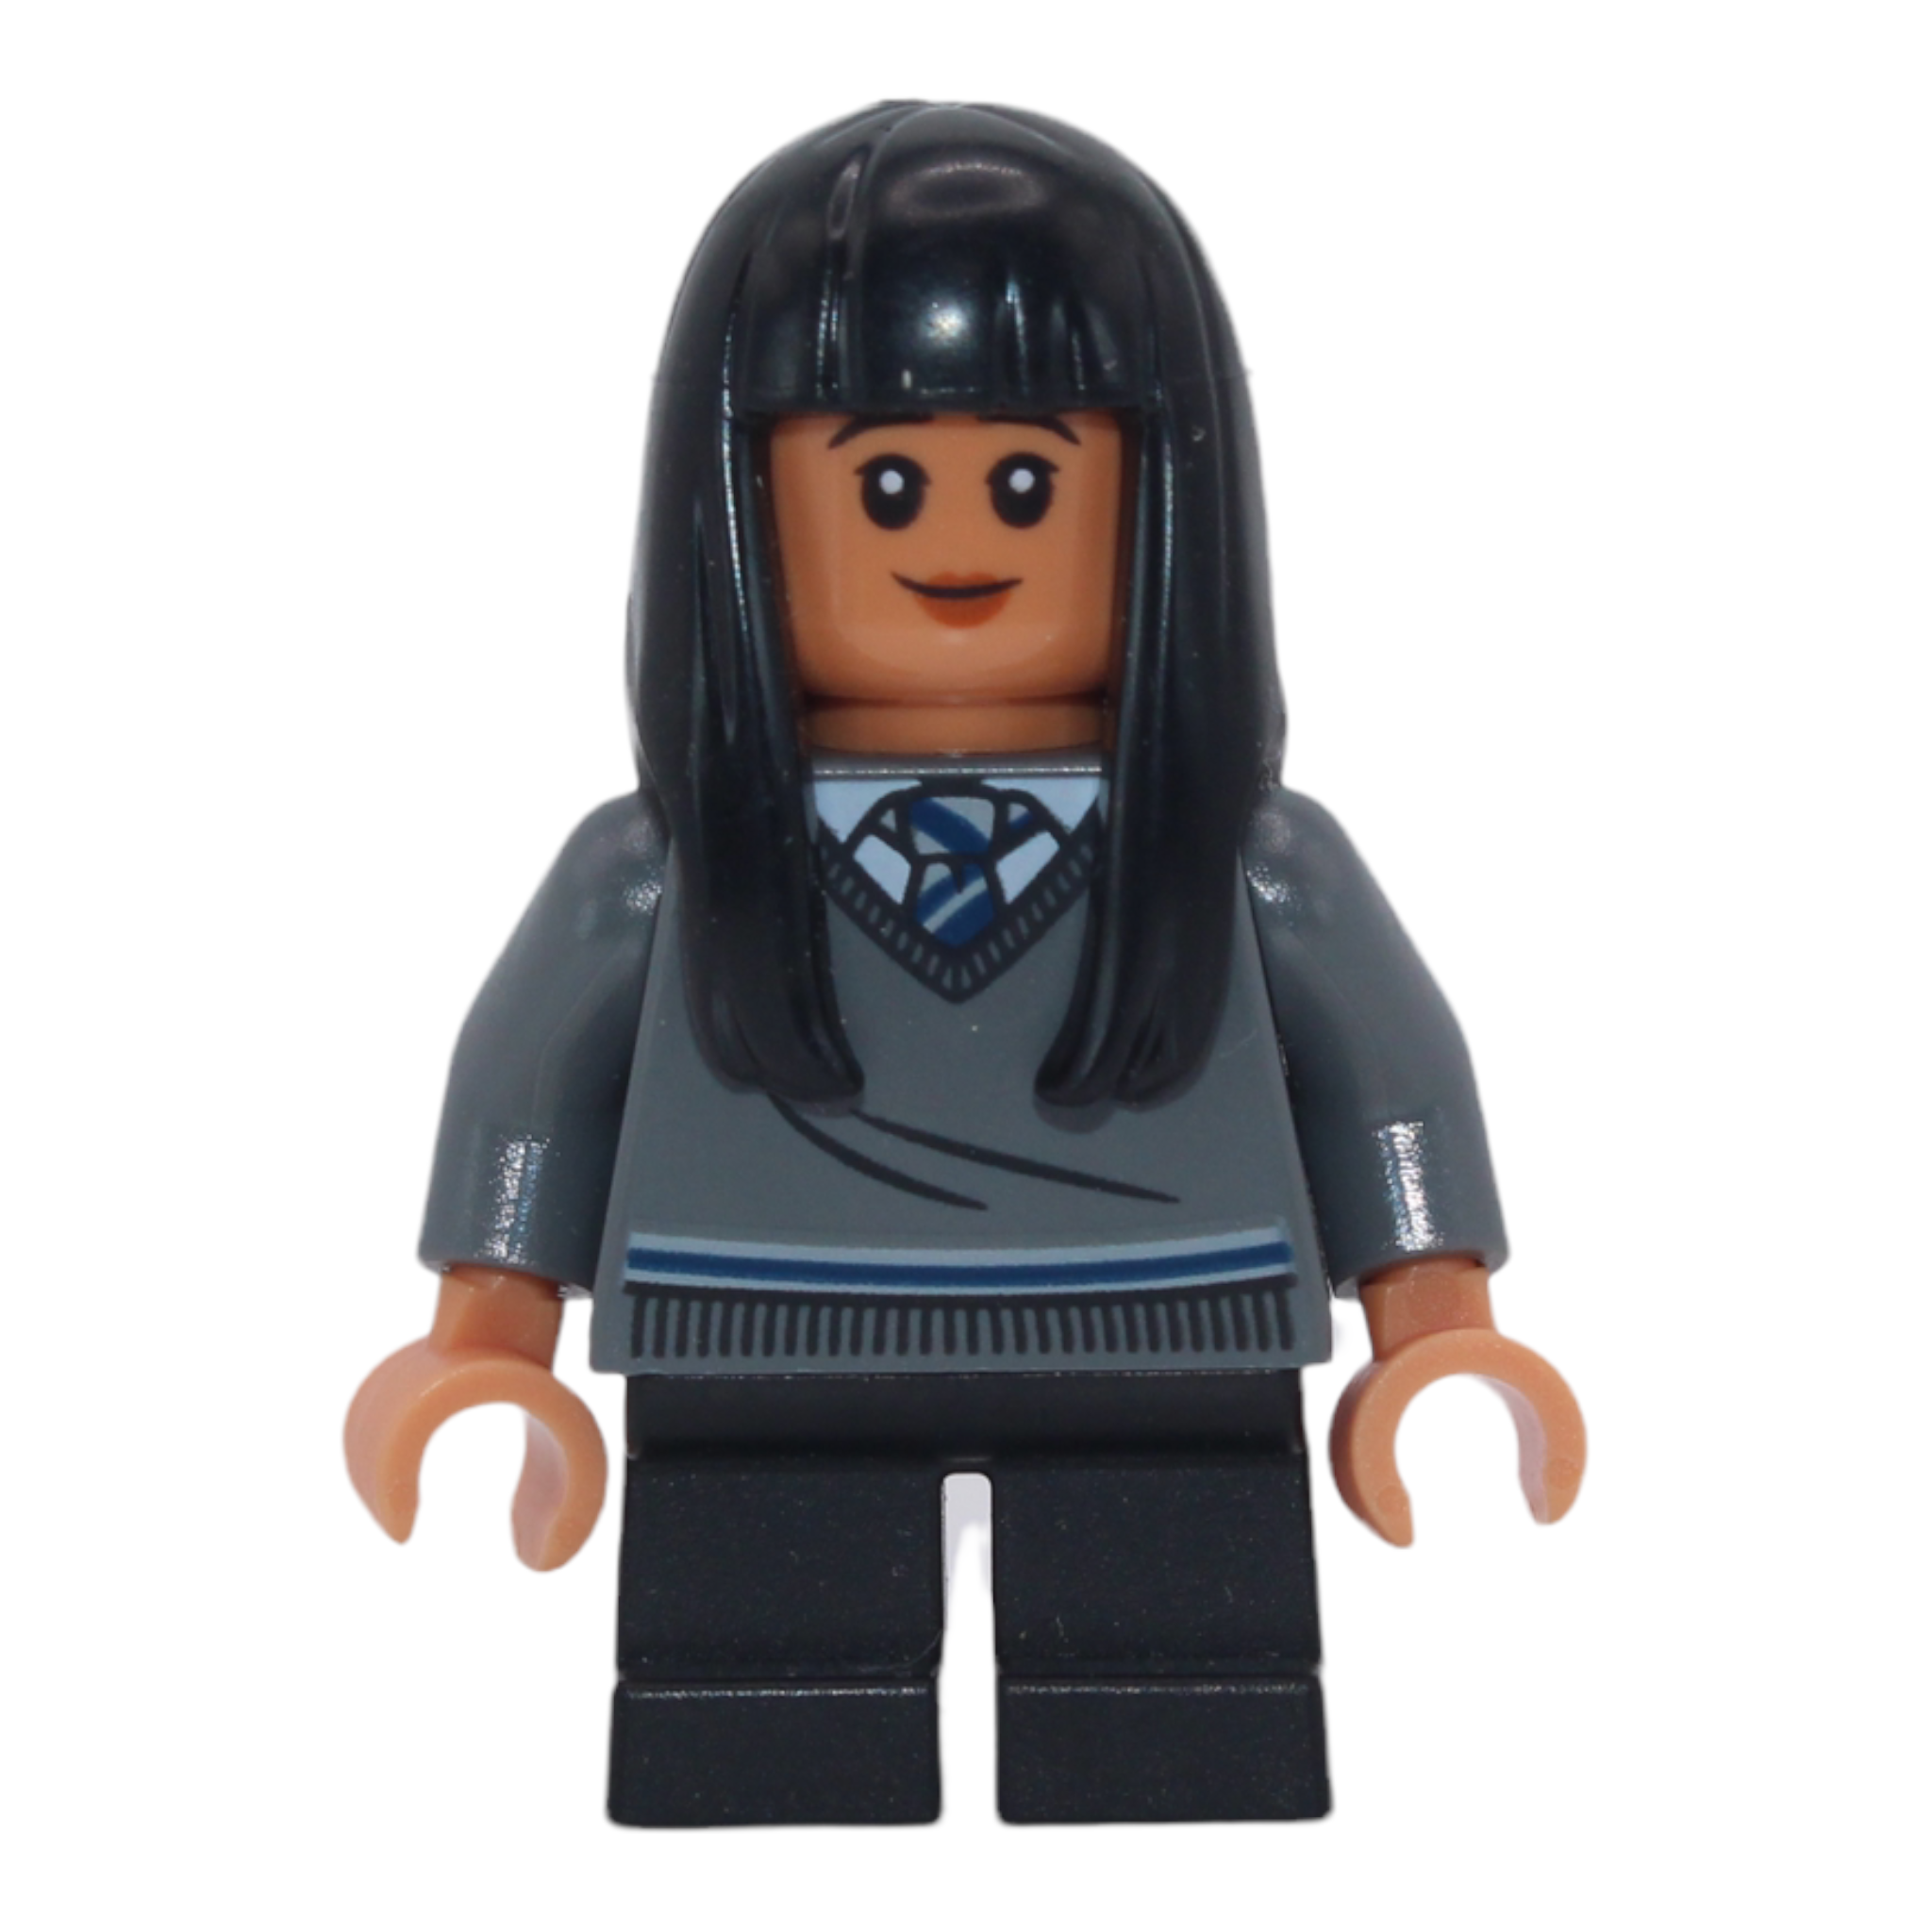 Cho Chang (Ravenclaw sweater with crest)